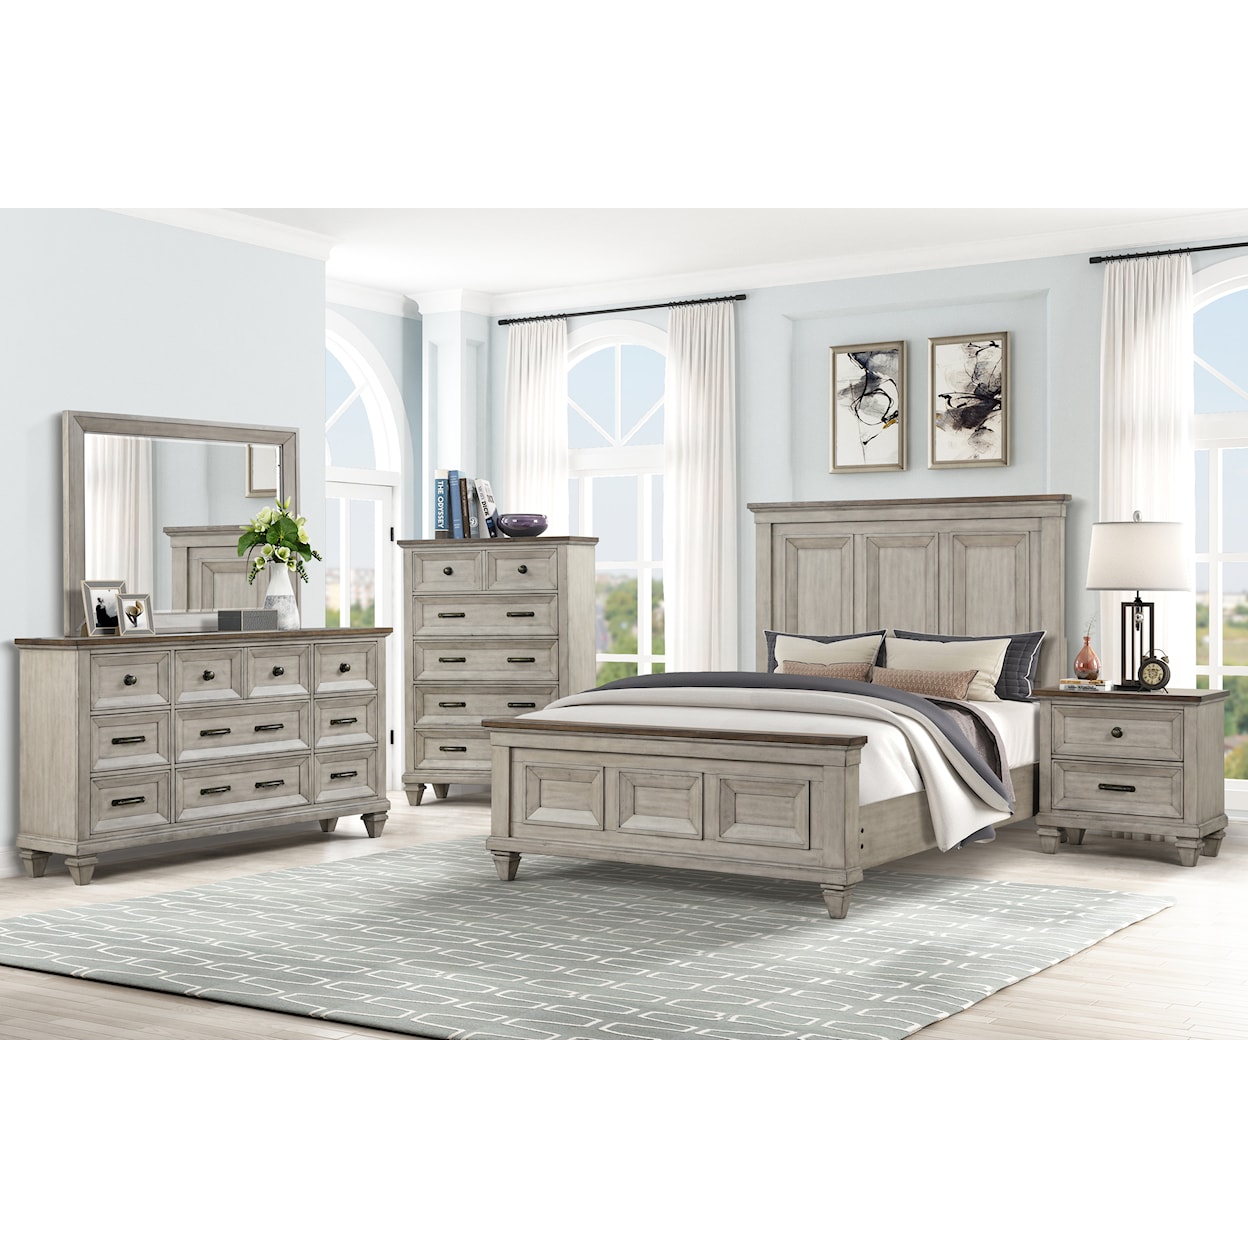 New Classic Furniture Mariana Queen Panel Bed